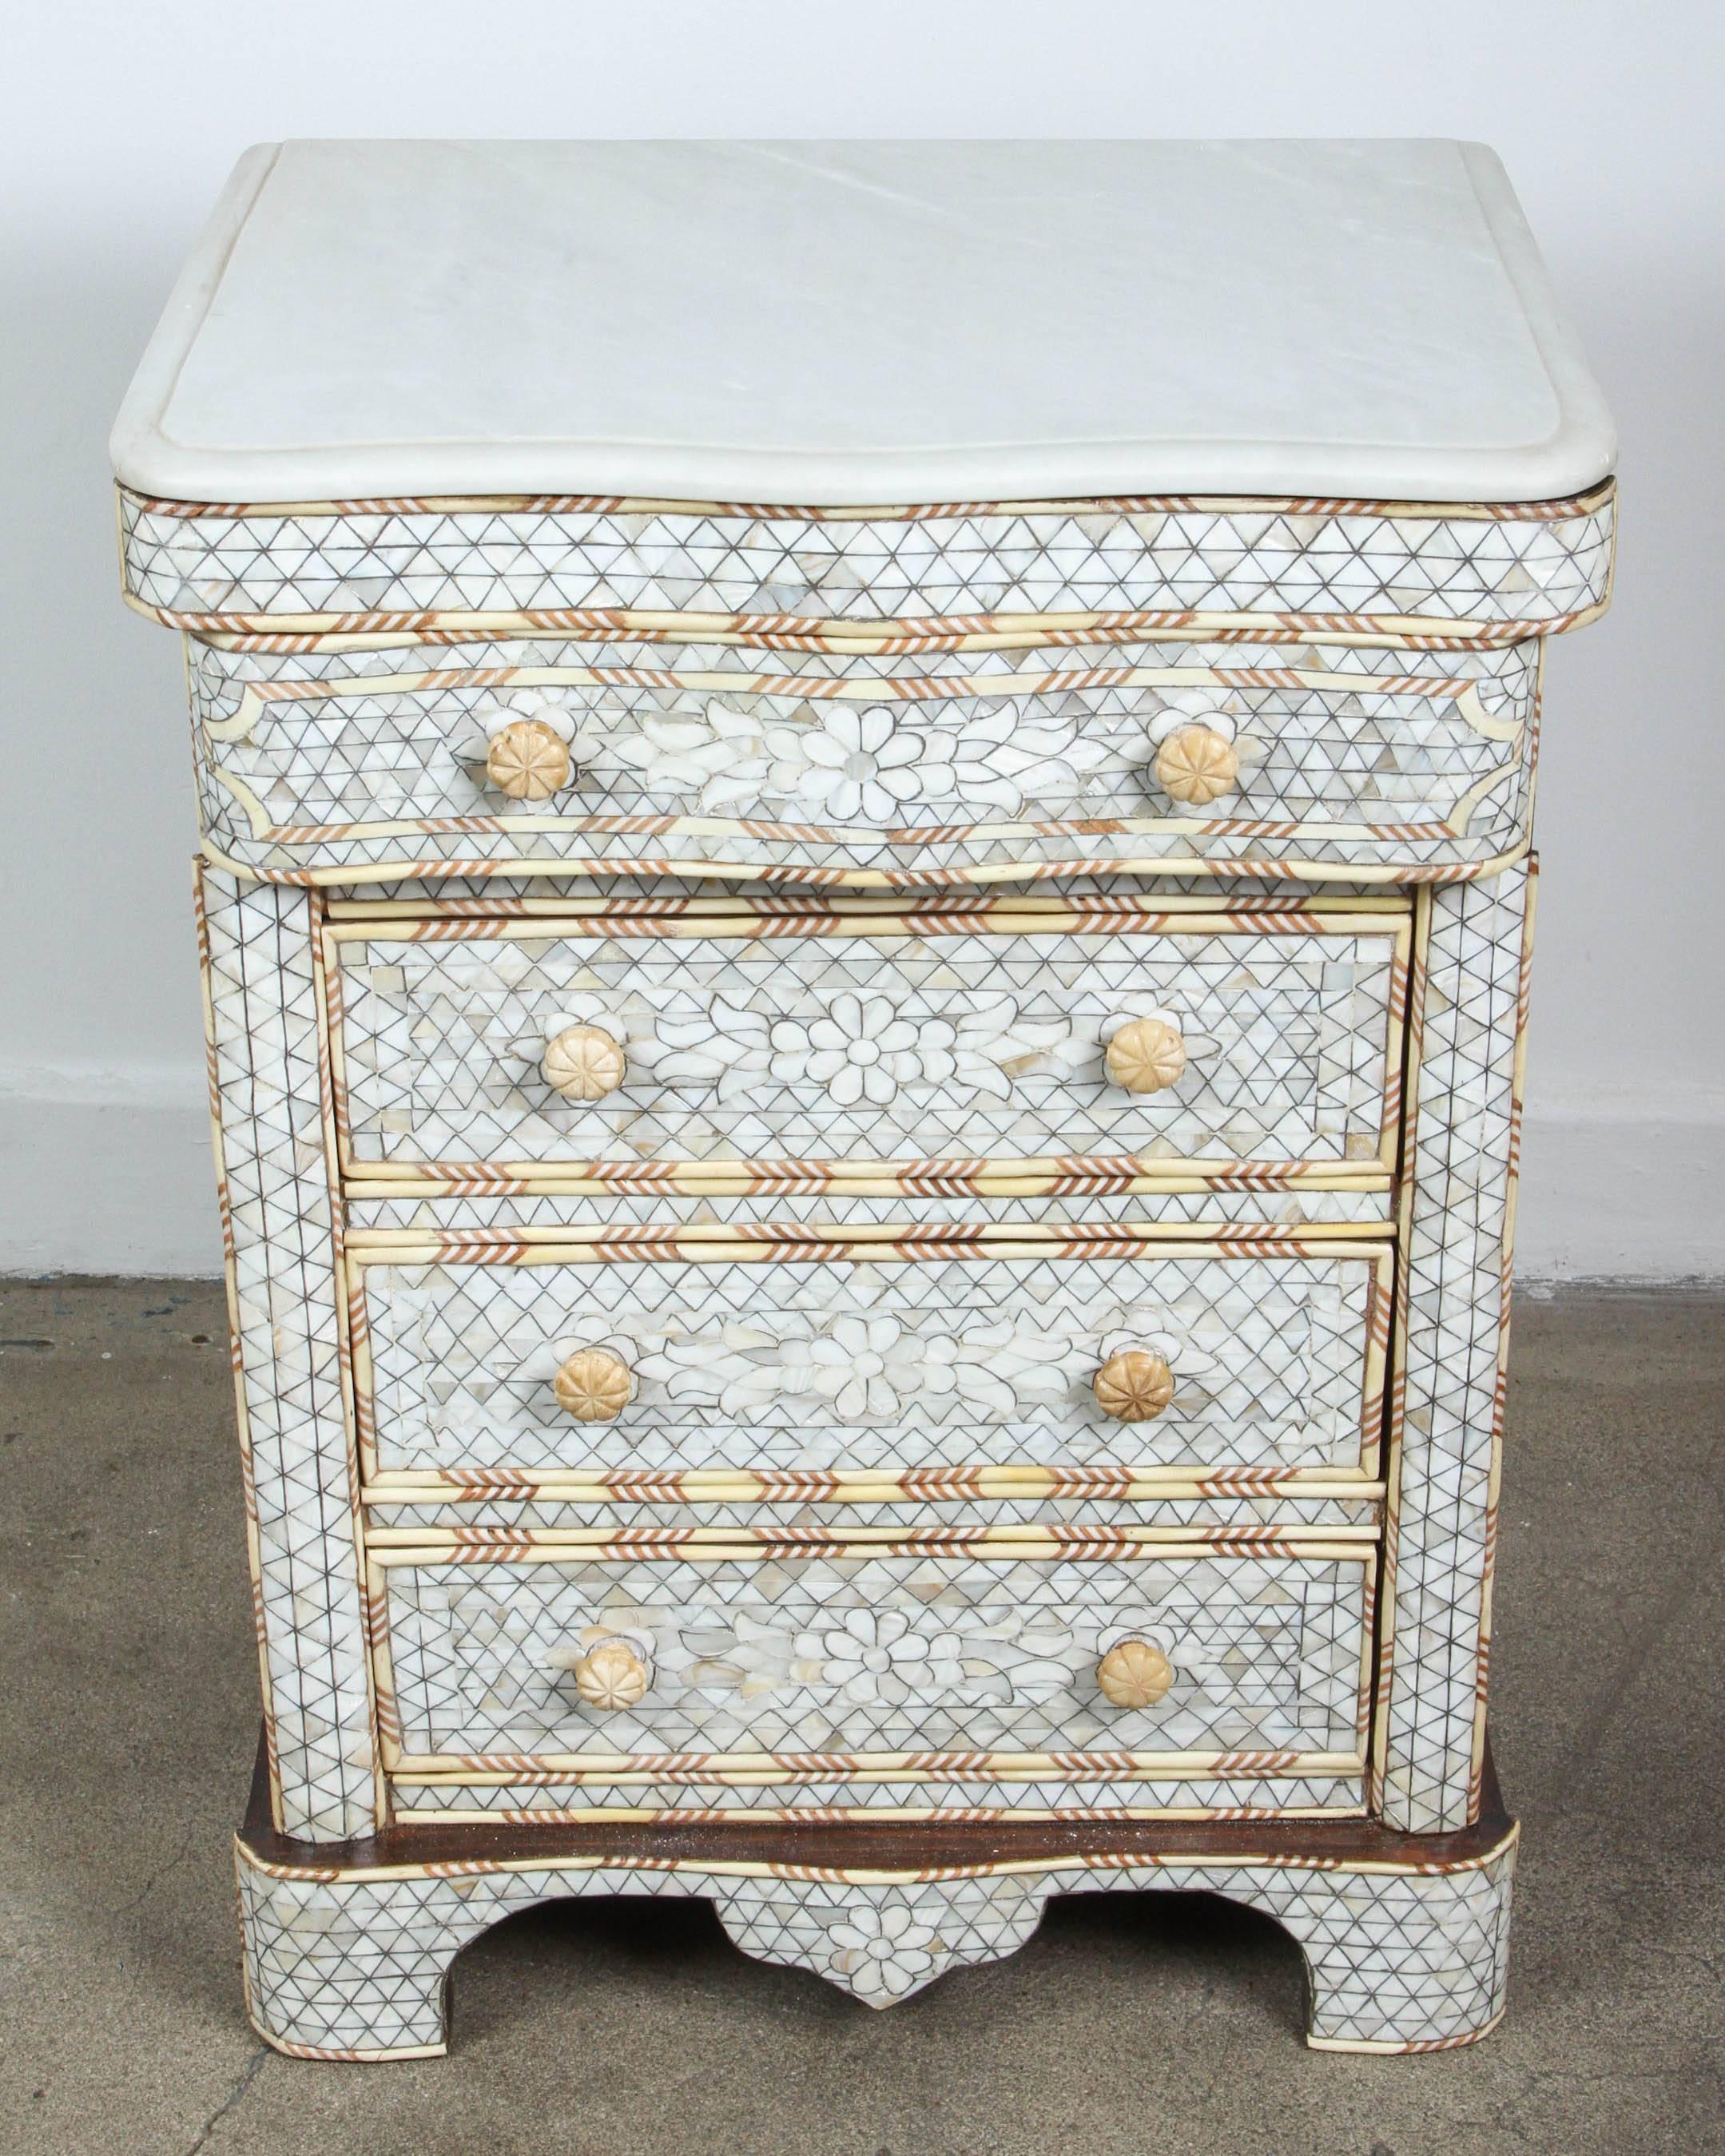 Fabulous pair of Middle Eastern Syrian mother-of-pearl inlay nightstands.
Handcrafted white small wedding dresser with four drawers, wood inlay with mother-of-pearl, shell and bone.
Moorish arches and intricate Islamic designs.
Dowry chest of